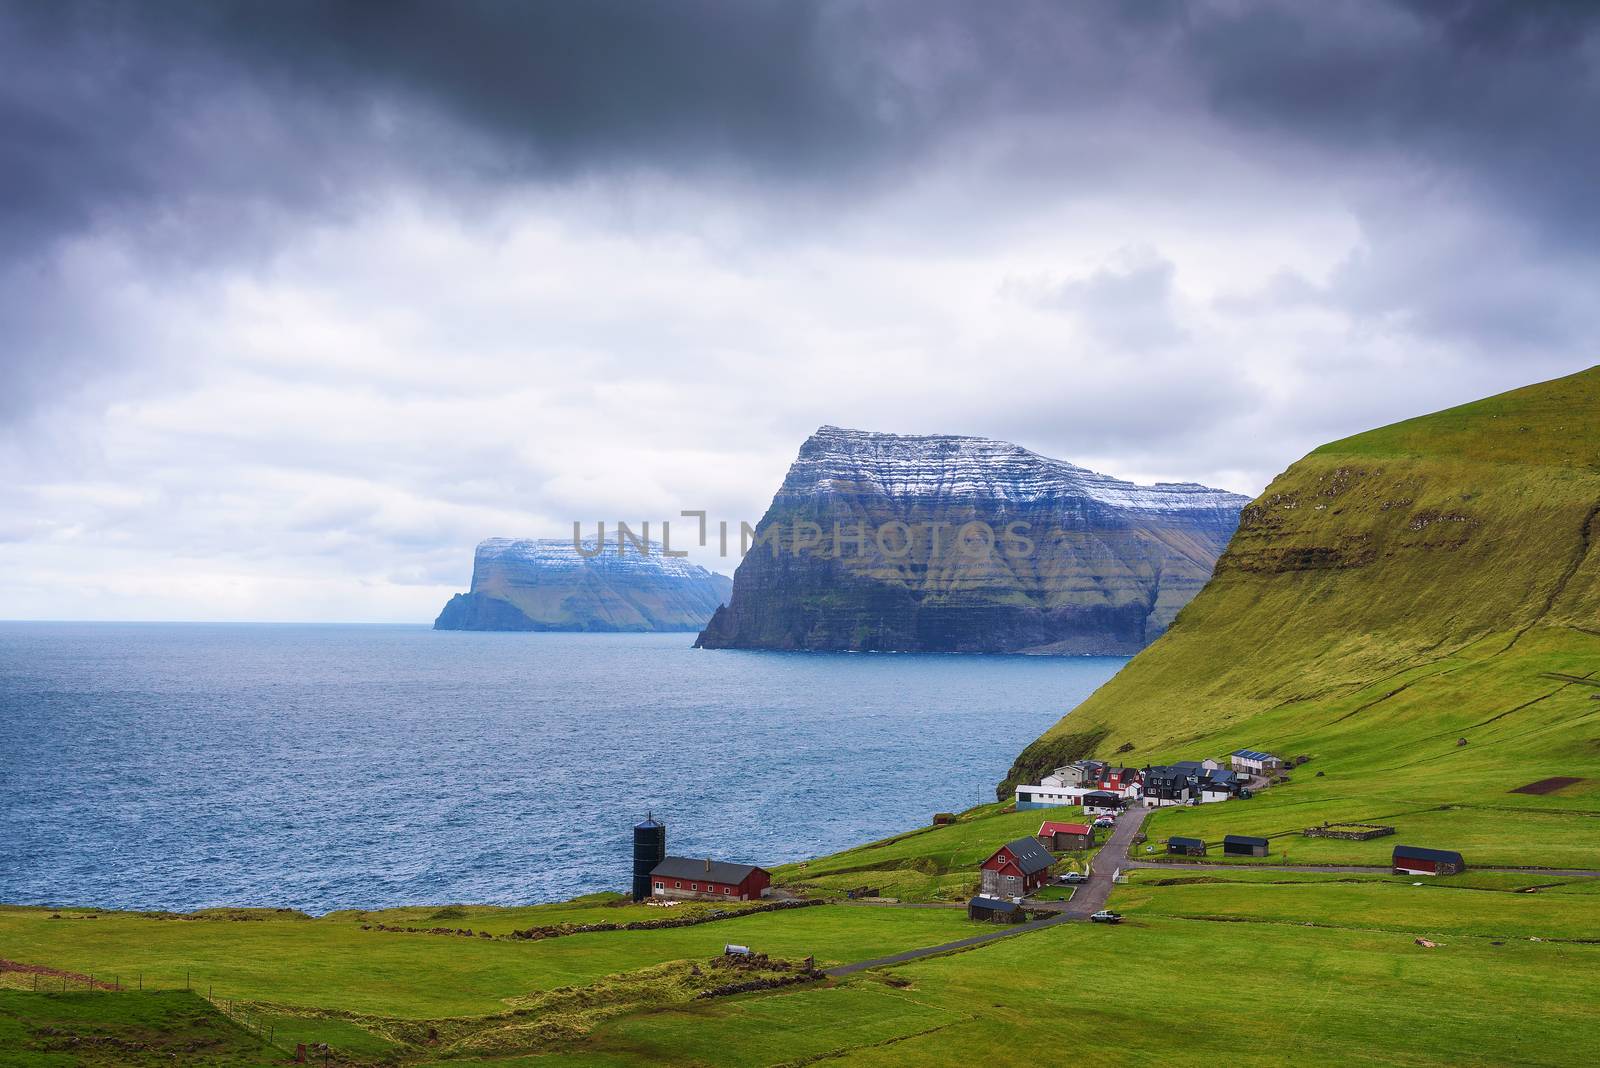 Village of Trollanes located on the island of Kalsoy in Faroe Islands with snow-capped mountains of Kunoy and Bordoy in the background